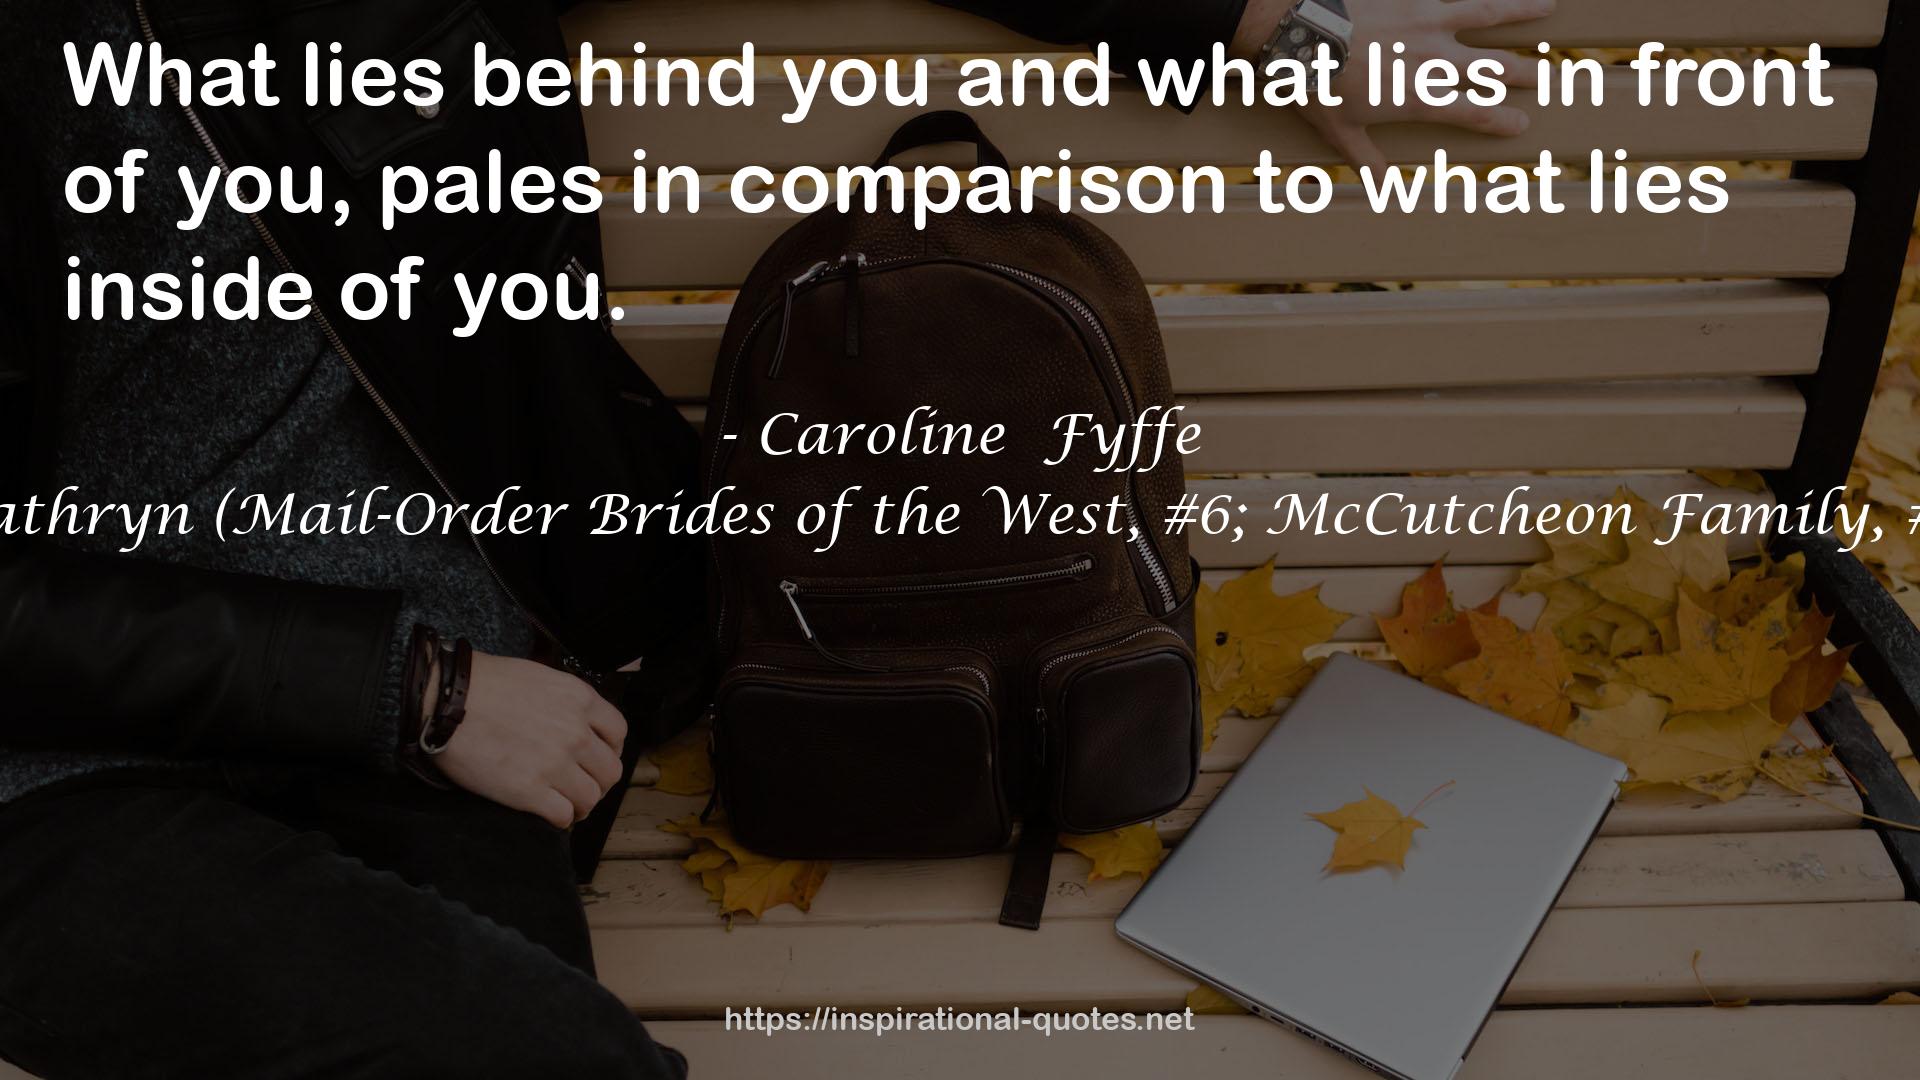 Kathryn (Mail-Order Brides of the West, #6; McCutcheon Family, #6) QUOTES